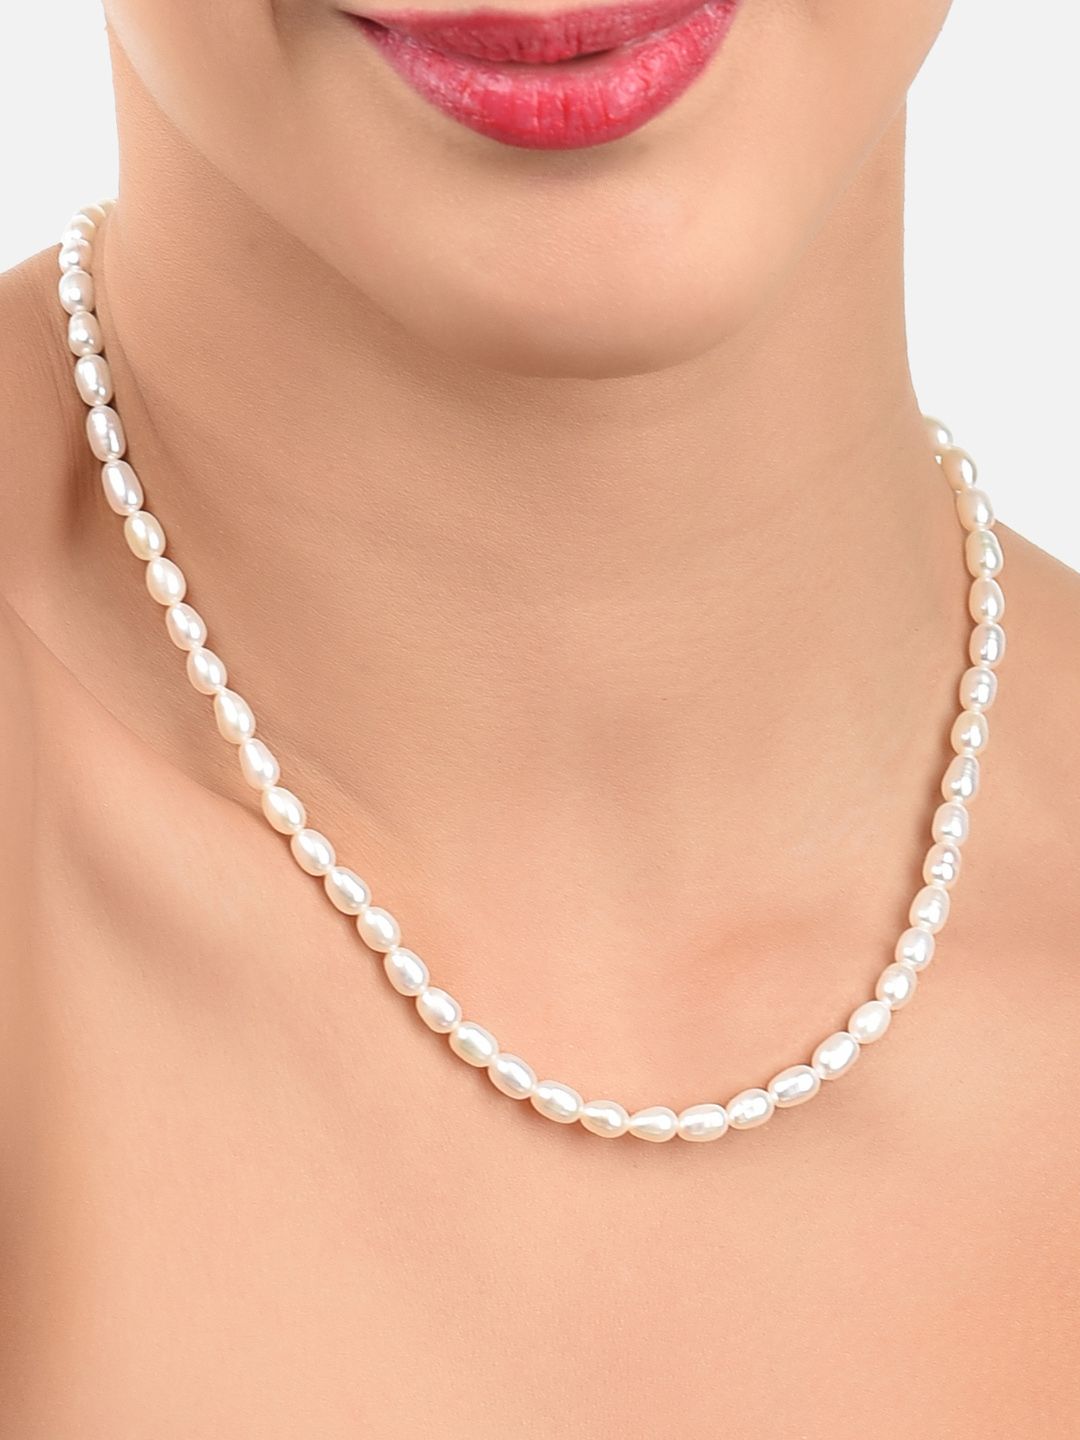 Zaveri Pearls Fresh Water Rice Pearls 4-5mm AAA+ Quality Necklace Price in India